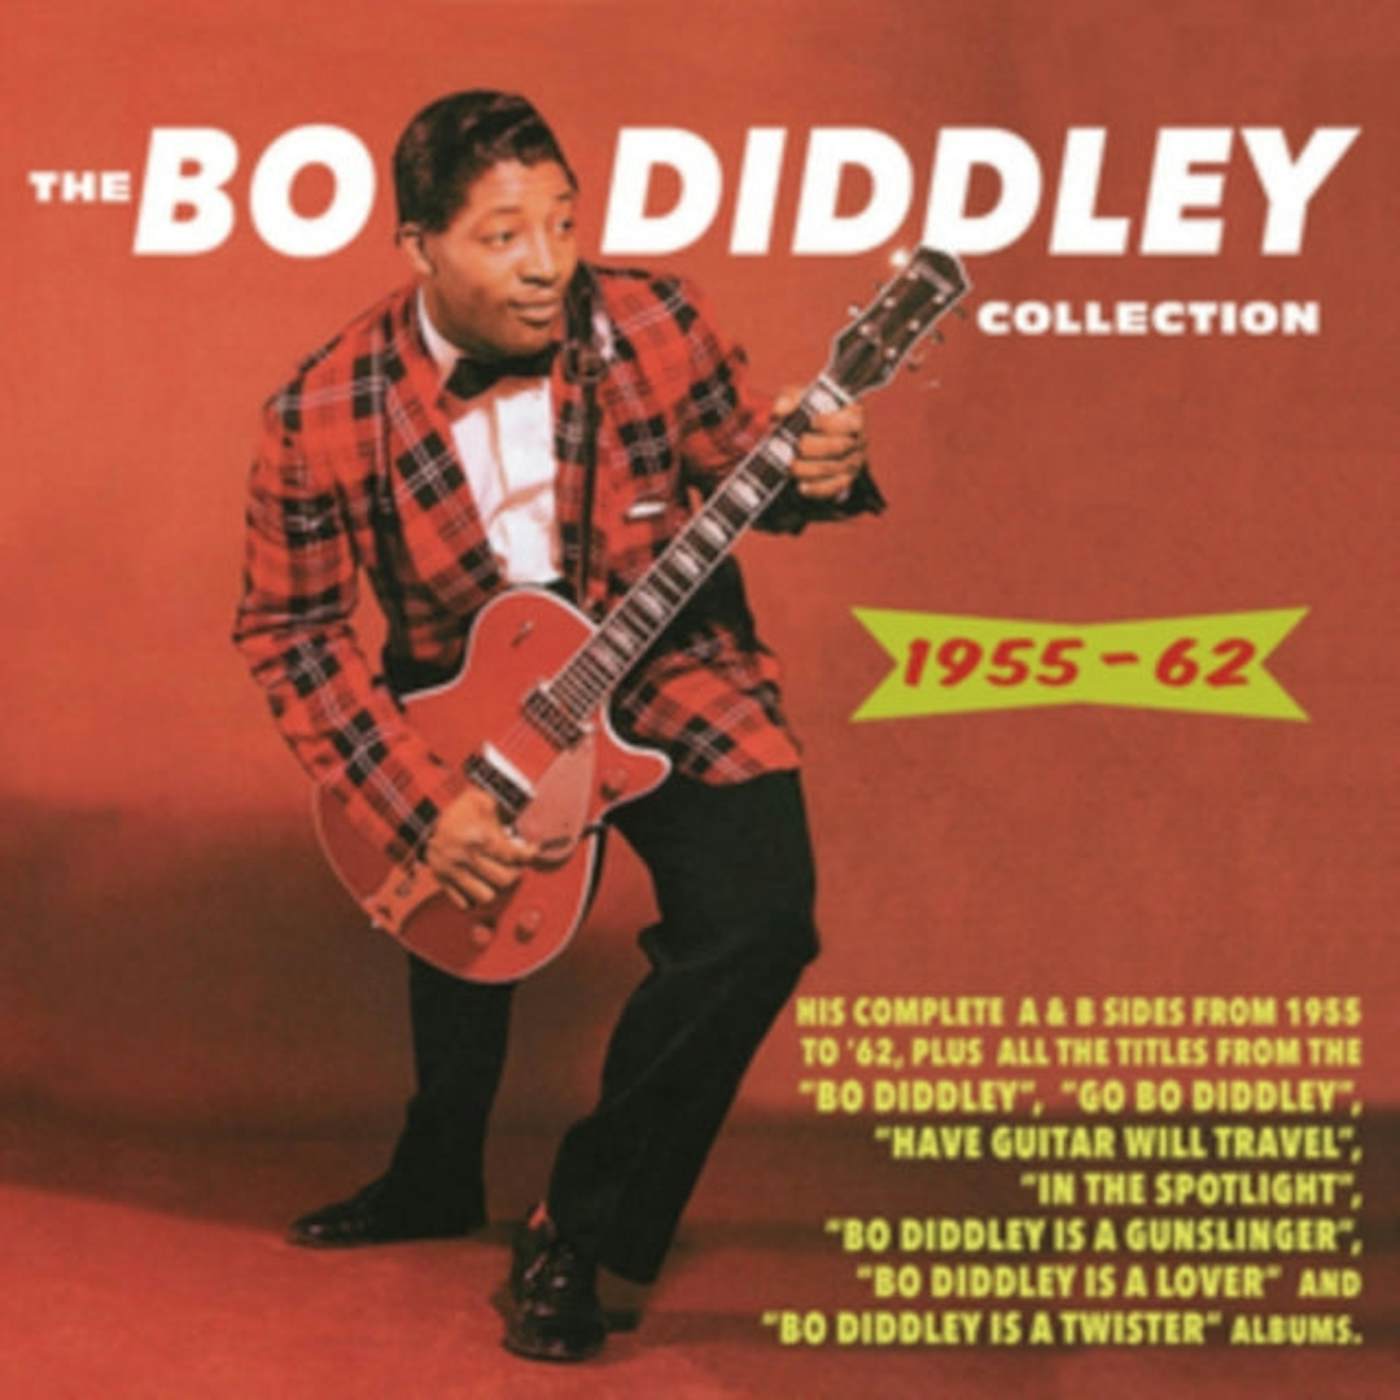 Bo Diddley CD - The Bo Diddley Collection 19 55-19 62